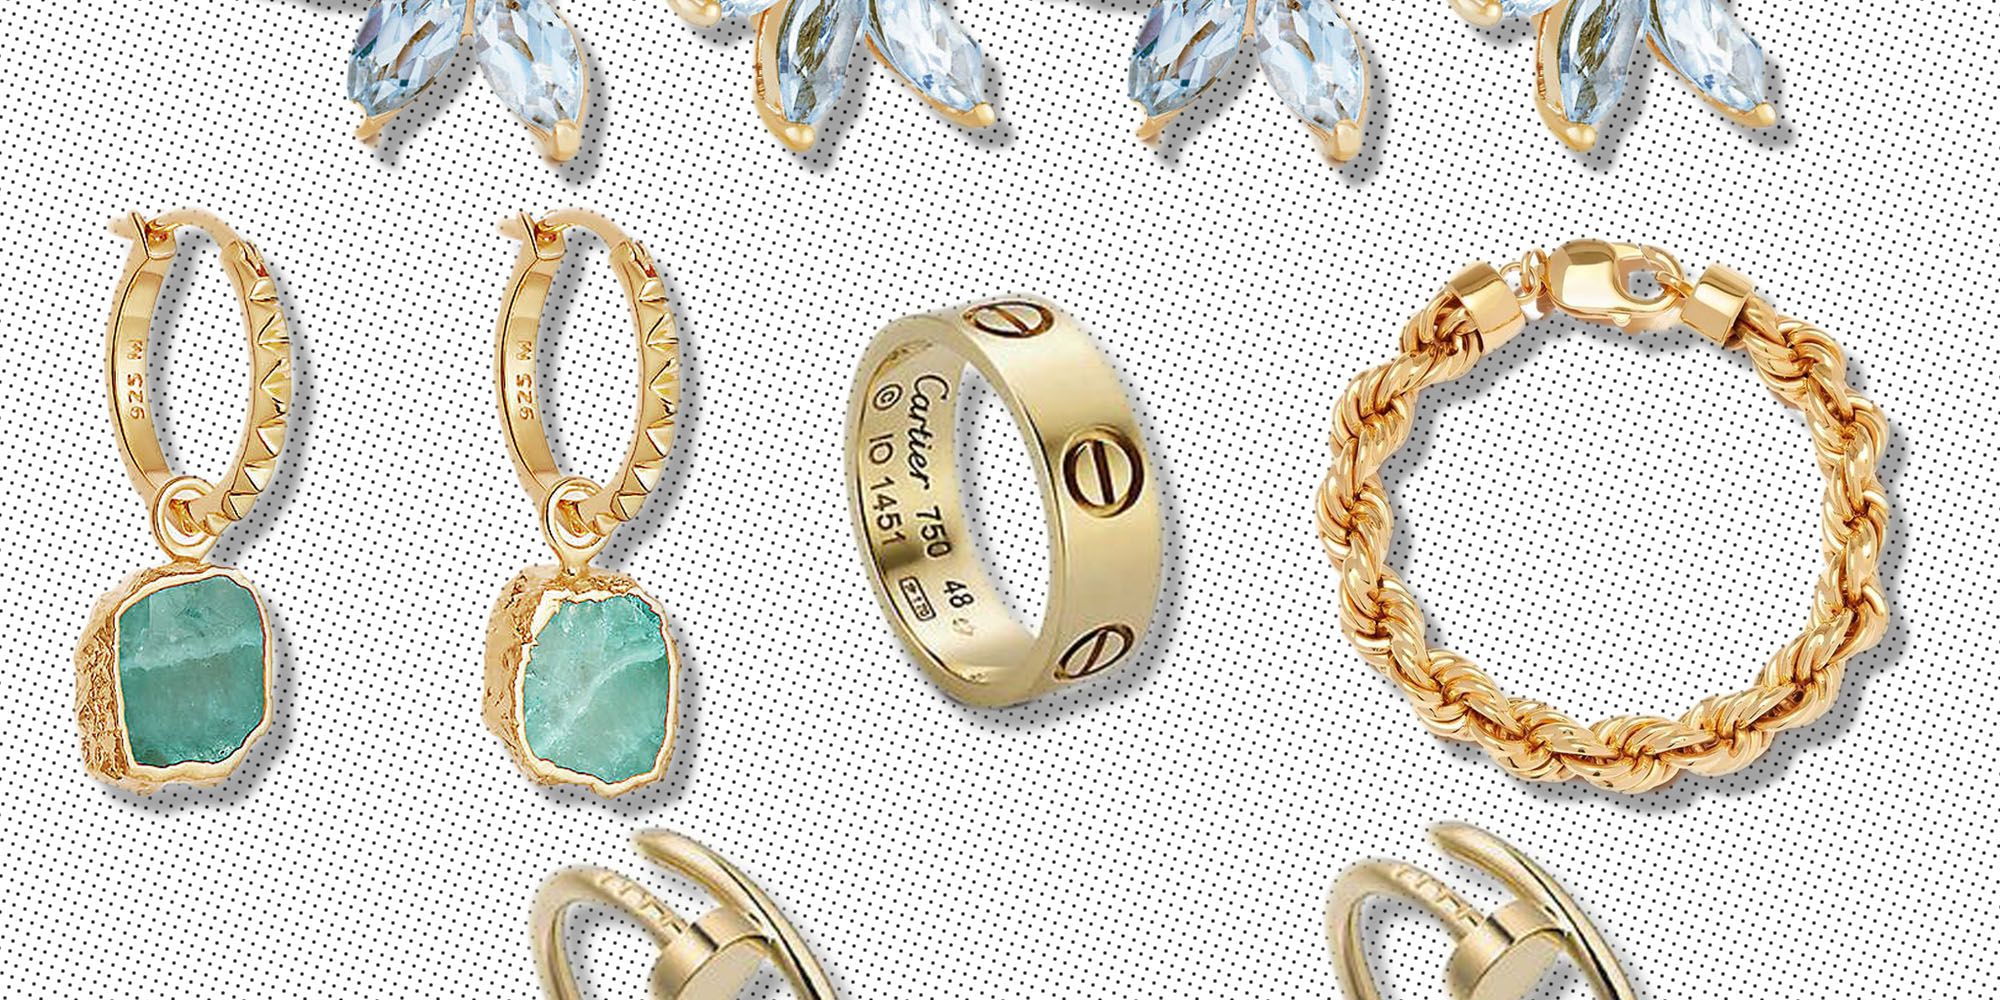 37 Pieces Of Bridal Jewellery You'll Be Obsessed With From Mejuri, Missoma, Cartier And More